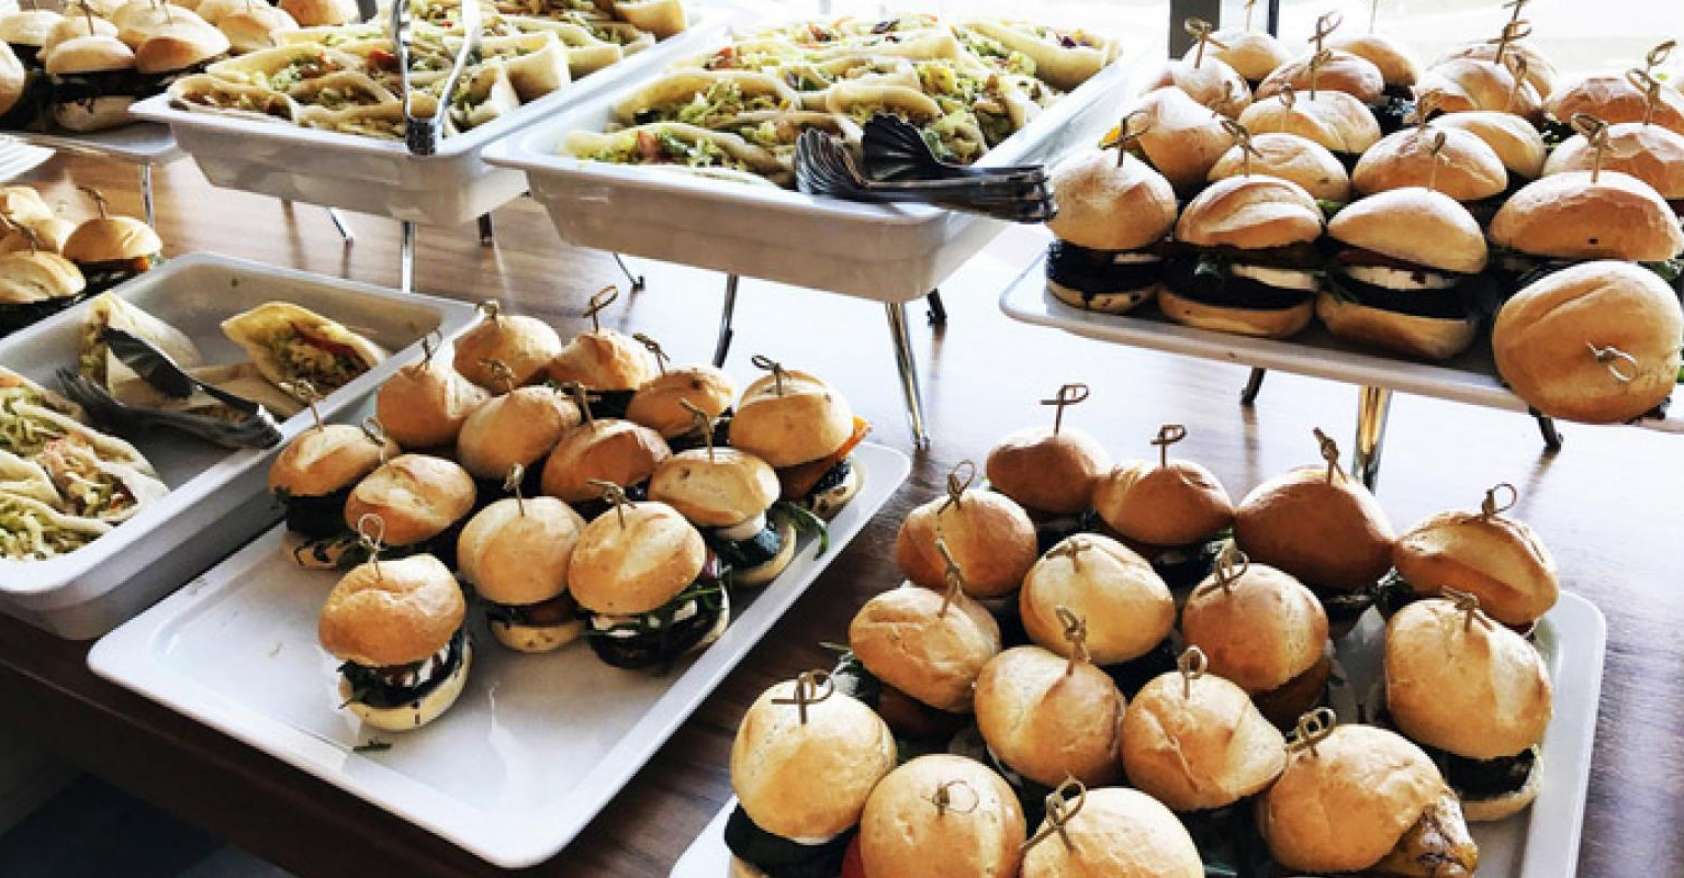 Buffet of different types of sliders to illustrate a food footprint for climate change